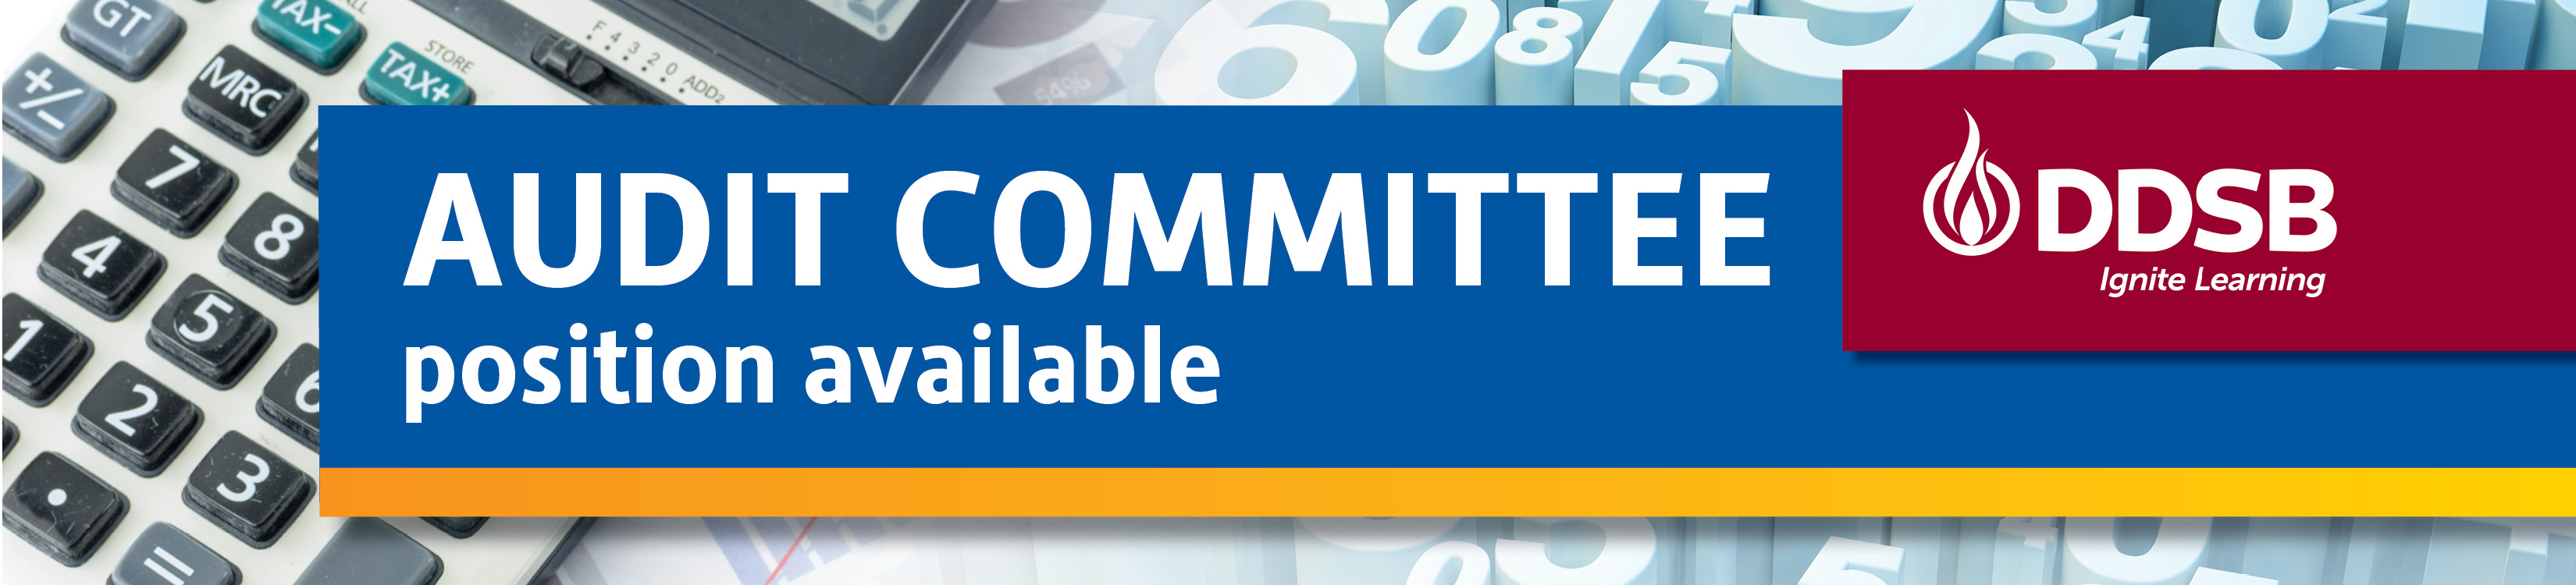 Audit Committee Position available